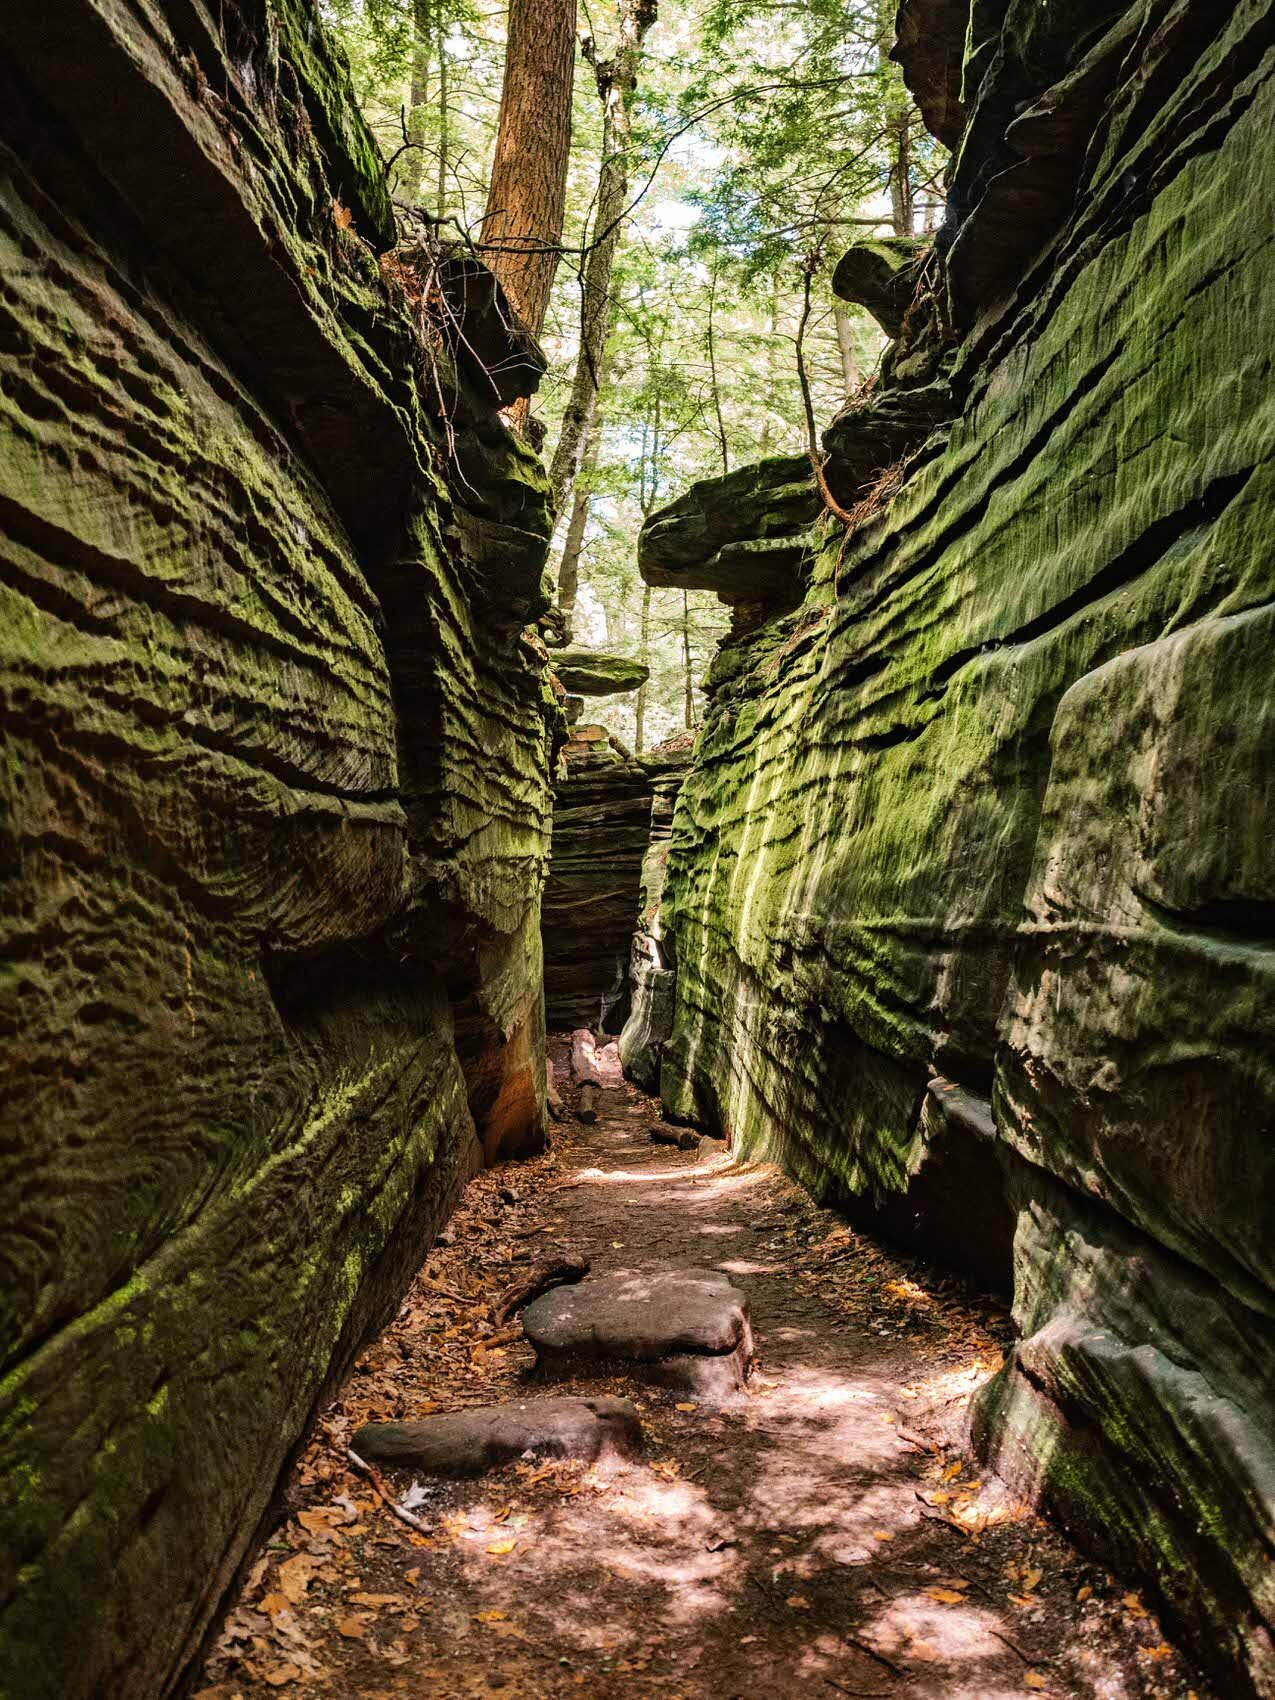 Cave+in+Cuyahoga+Valley+National+Park+trails.jpeg